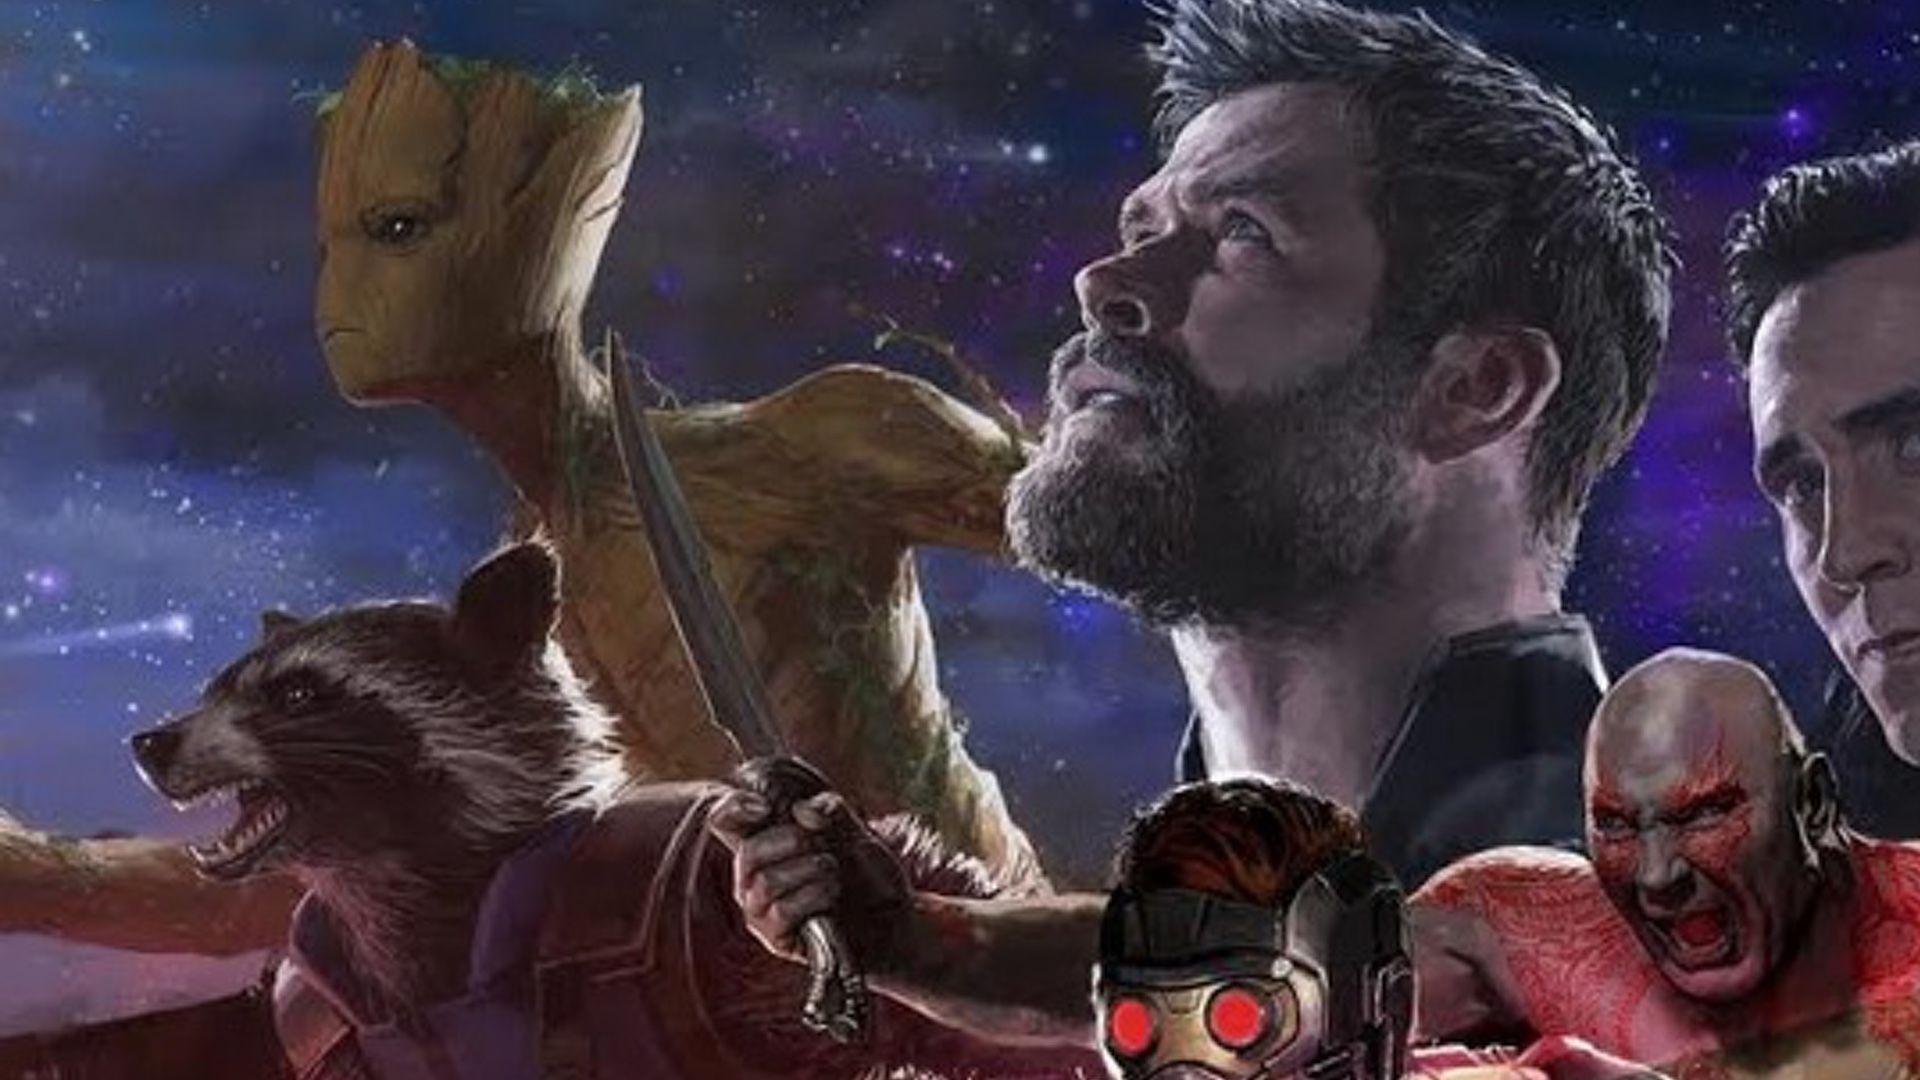 James Gunn Explains Why Groot is an Adolescent in AVENGERS: INFINITY